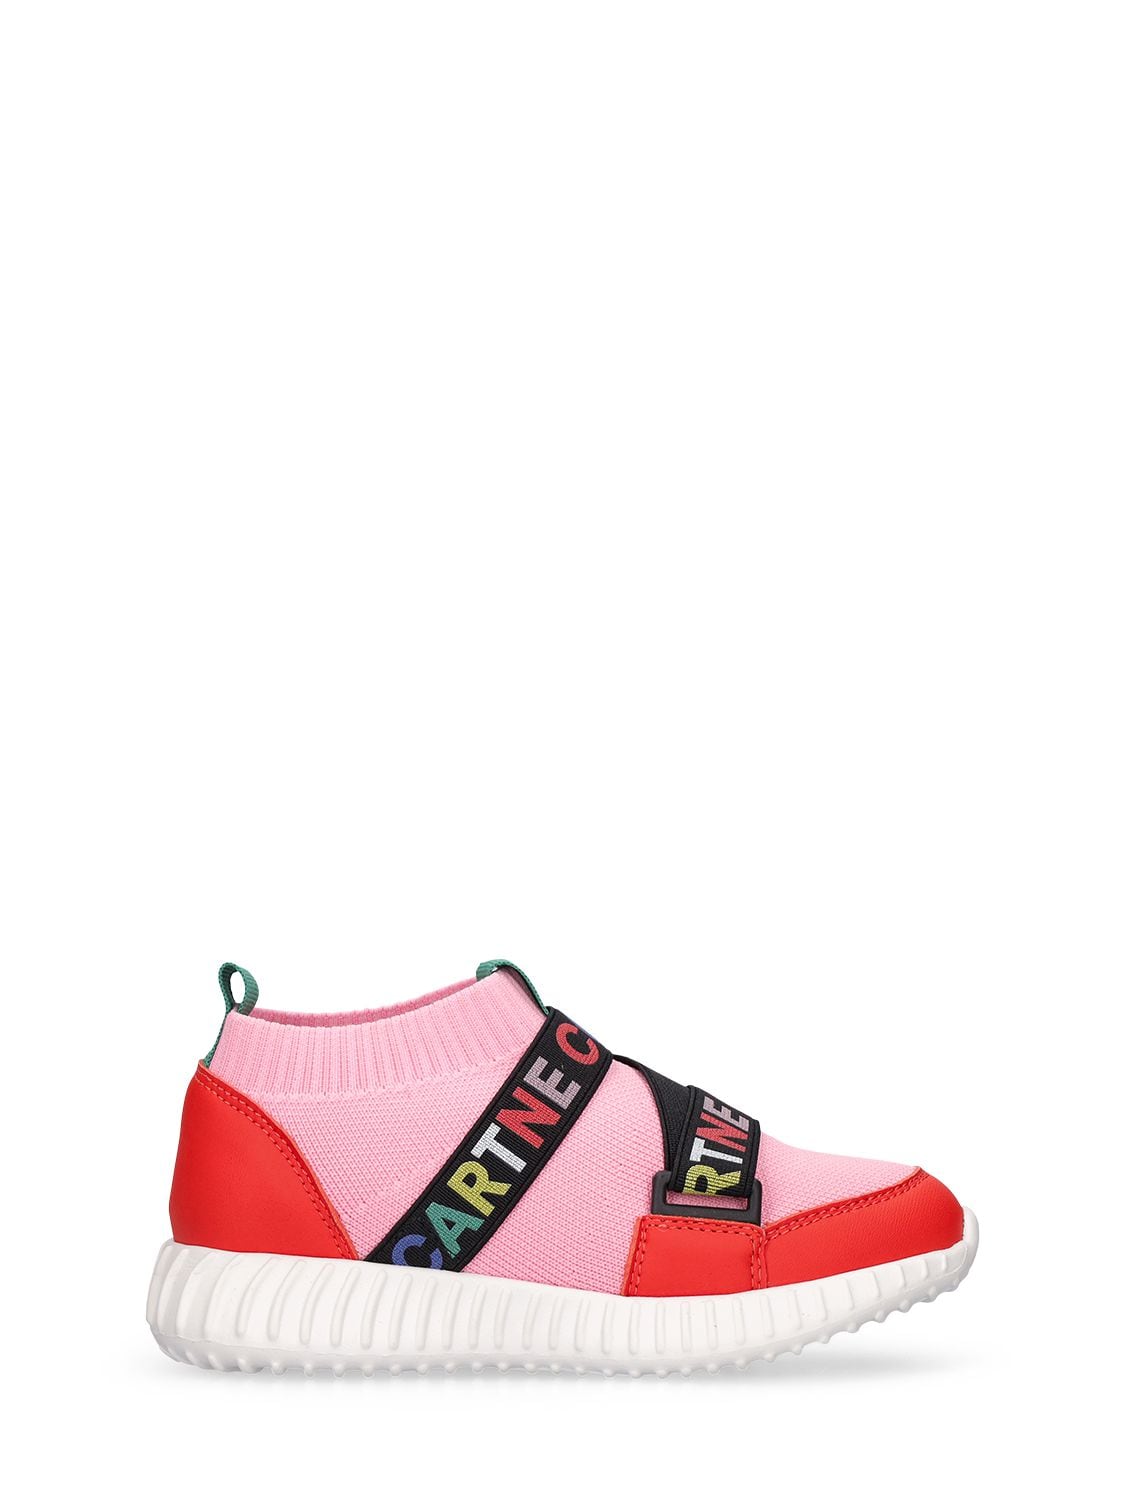 Stella Mccartney Kids' Knit Recycled Nylon Sneakers In Pink,red